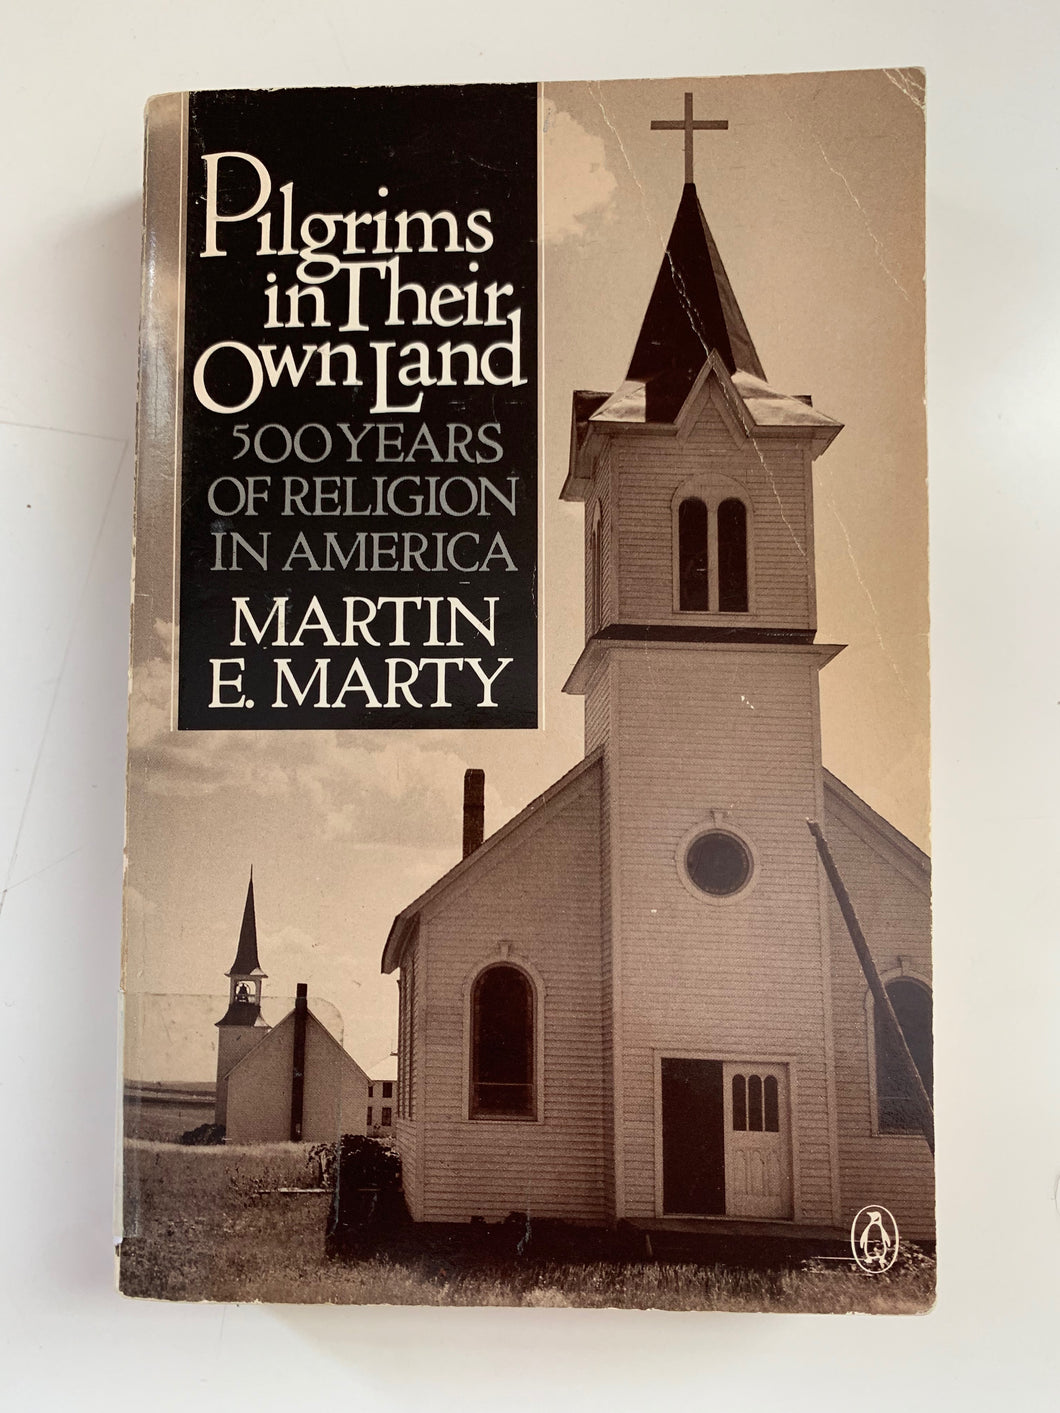 Pilgrims in Their Own Land by Martin E. Marty